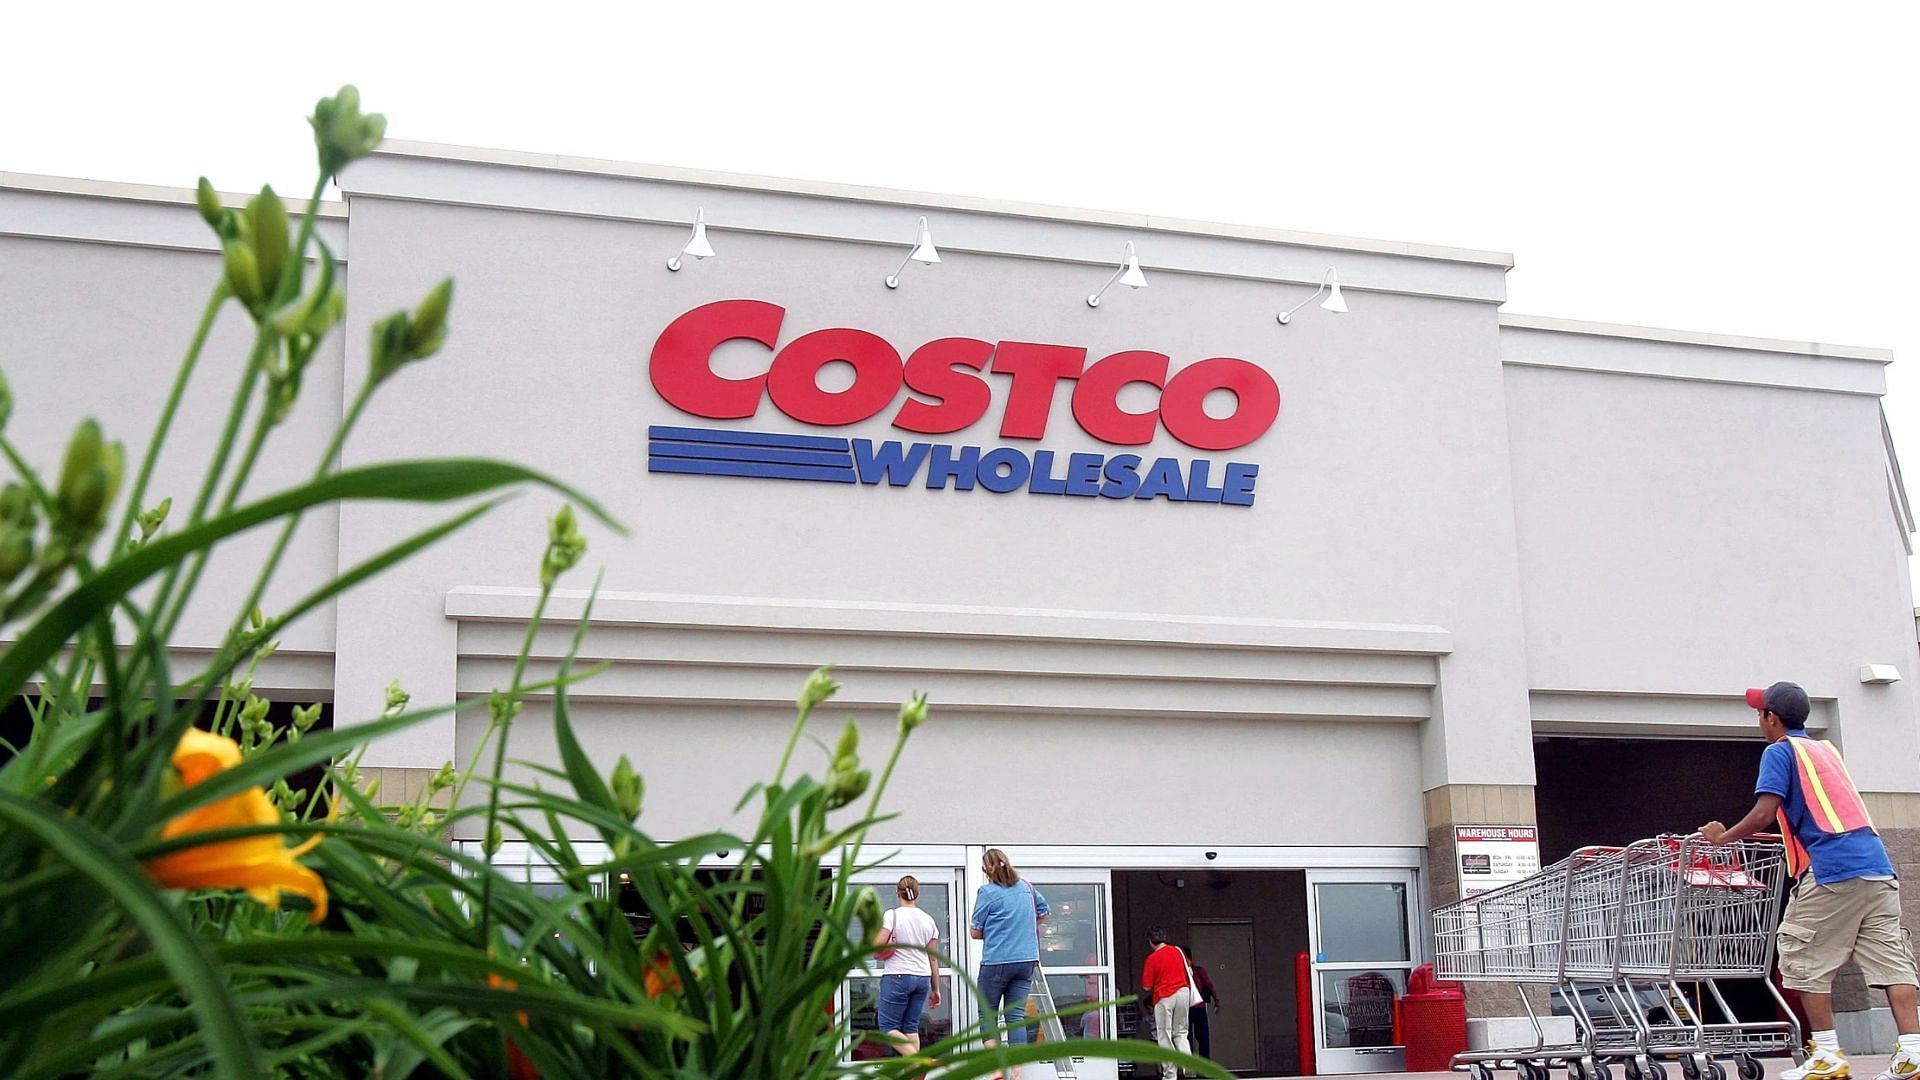 Costco offers limited time deals on groceries (Image via Tim Boyle/Getty Images)